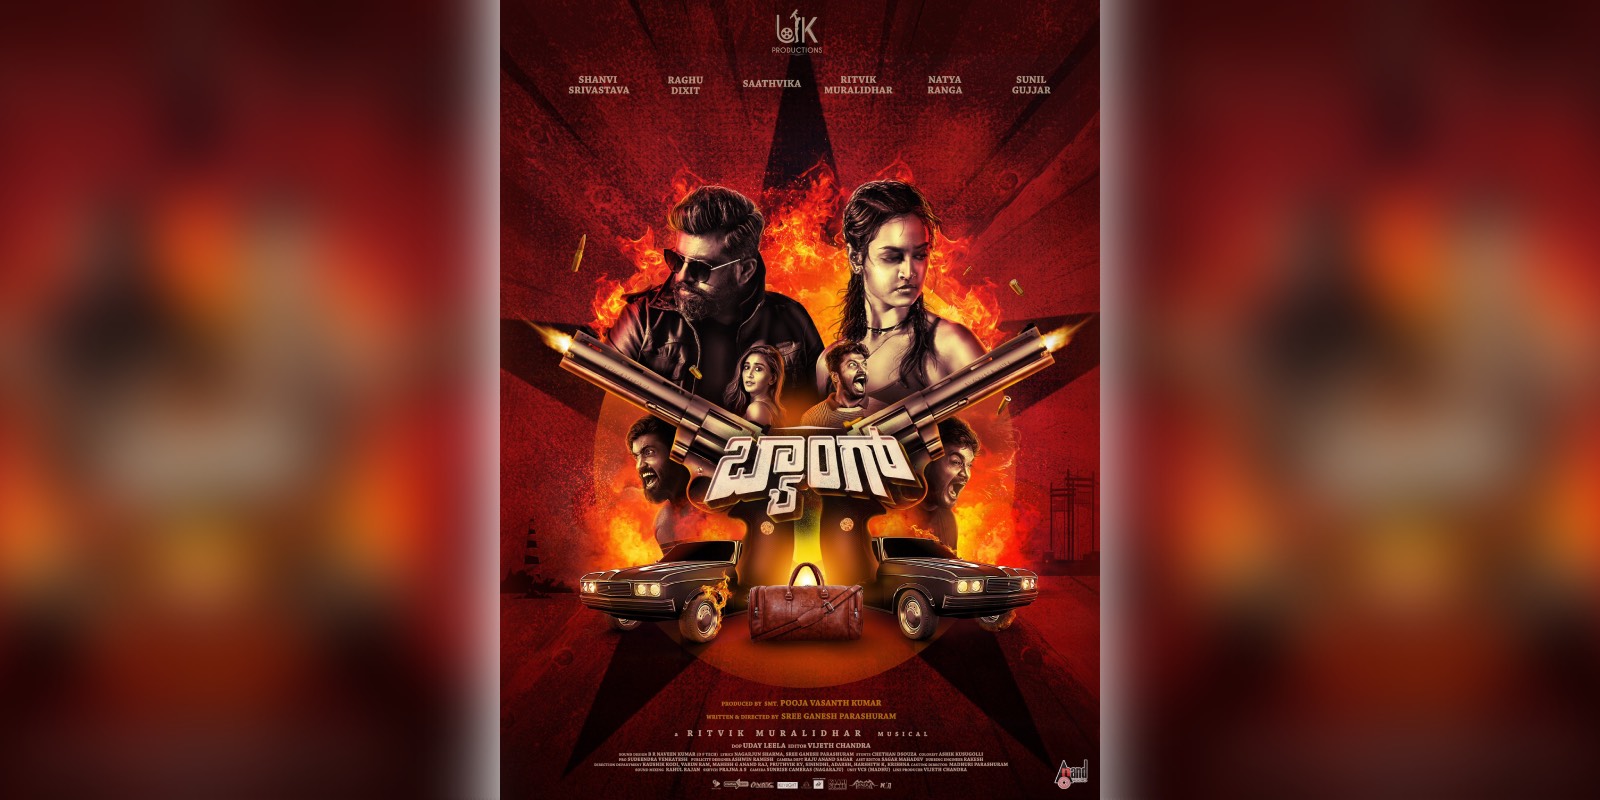 A poster of the film Baang